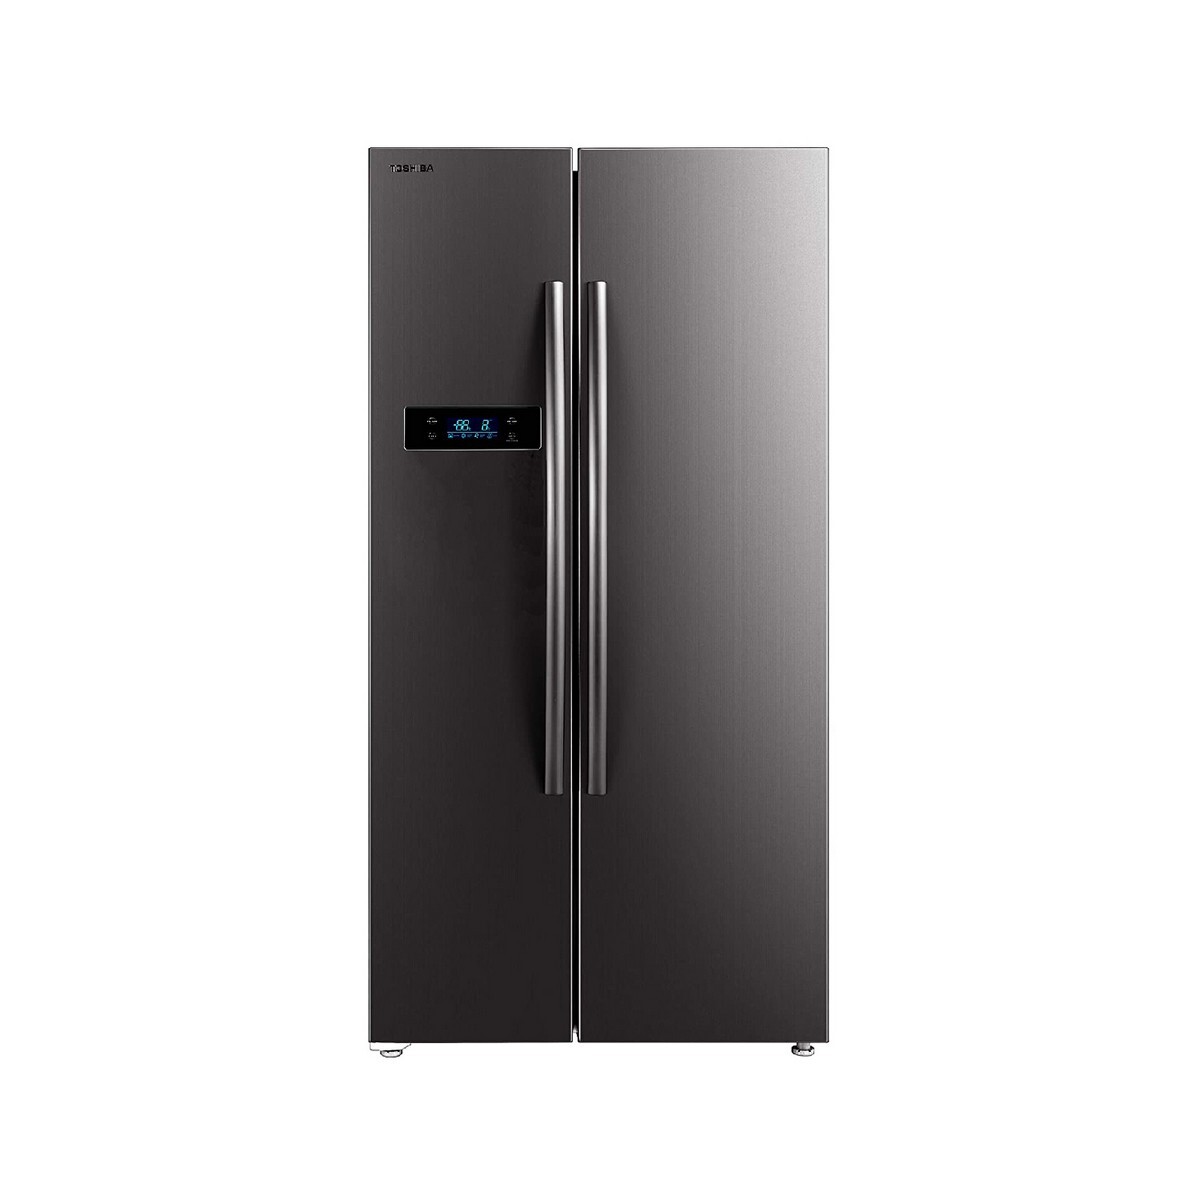 TOSHIBA 587 L with Inverter Side by Side Refrigerator